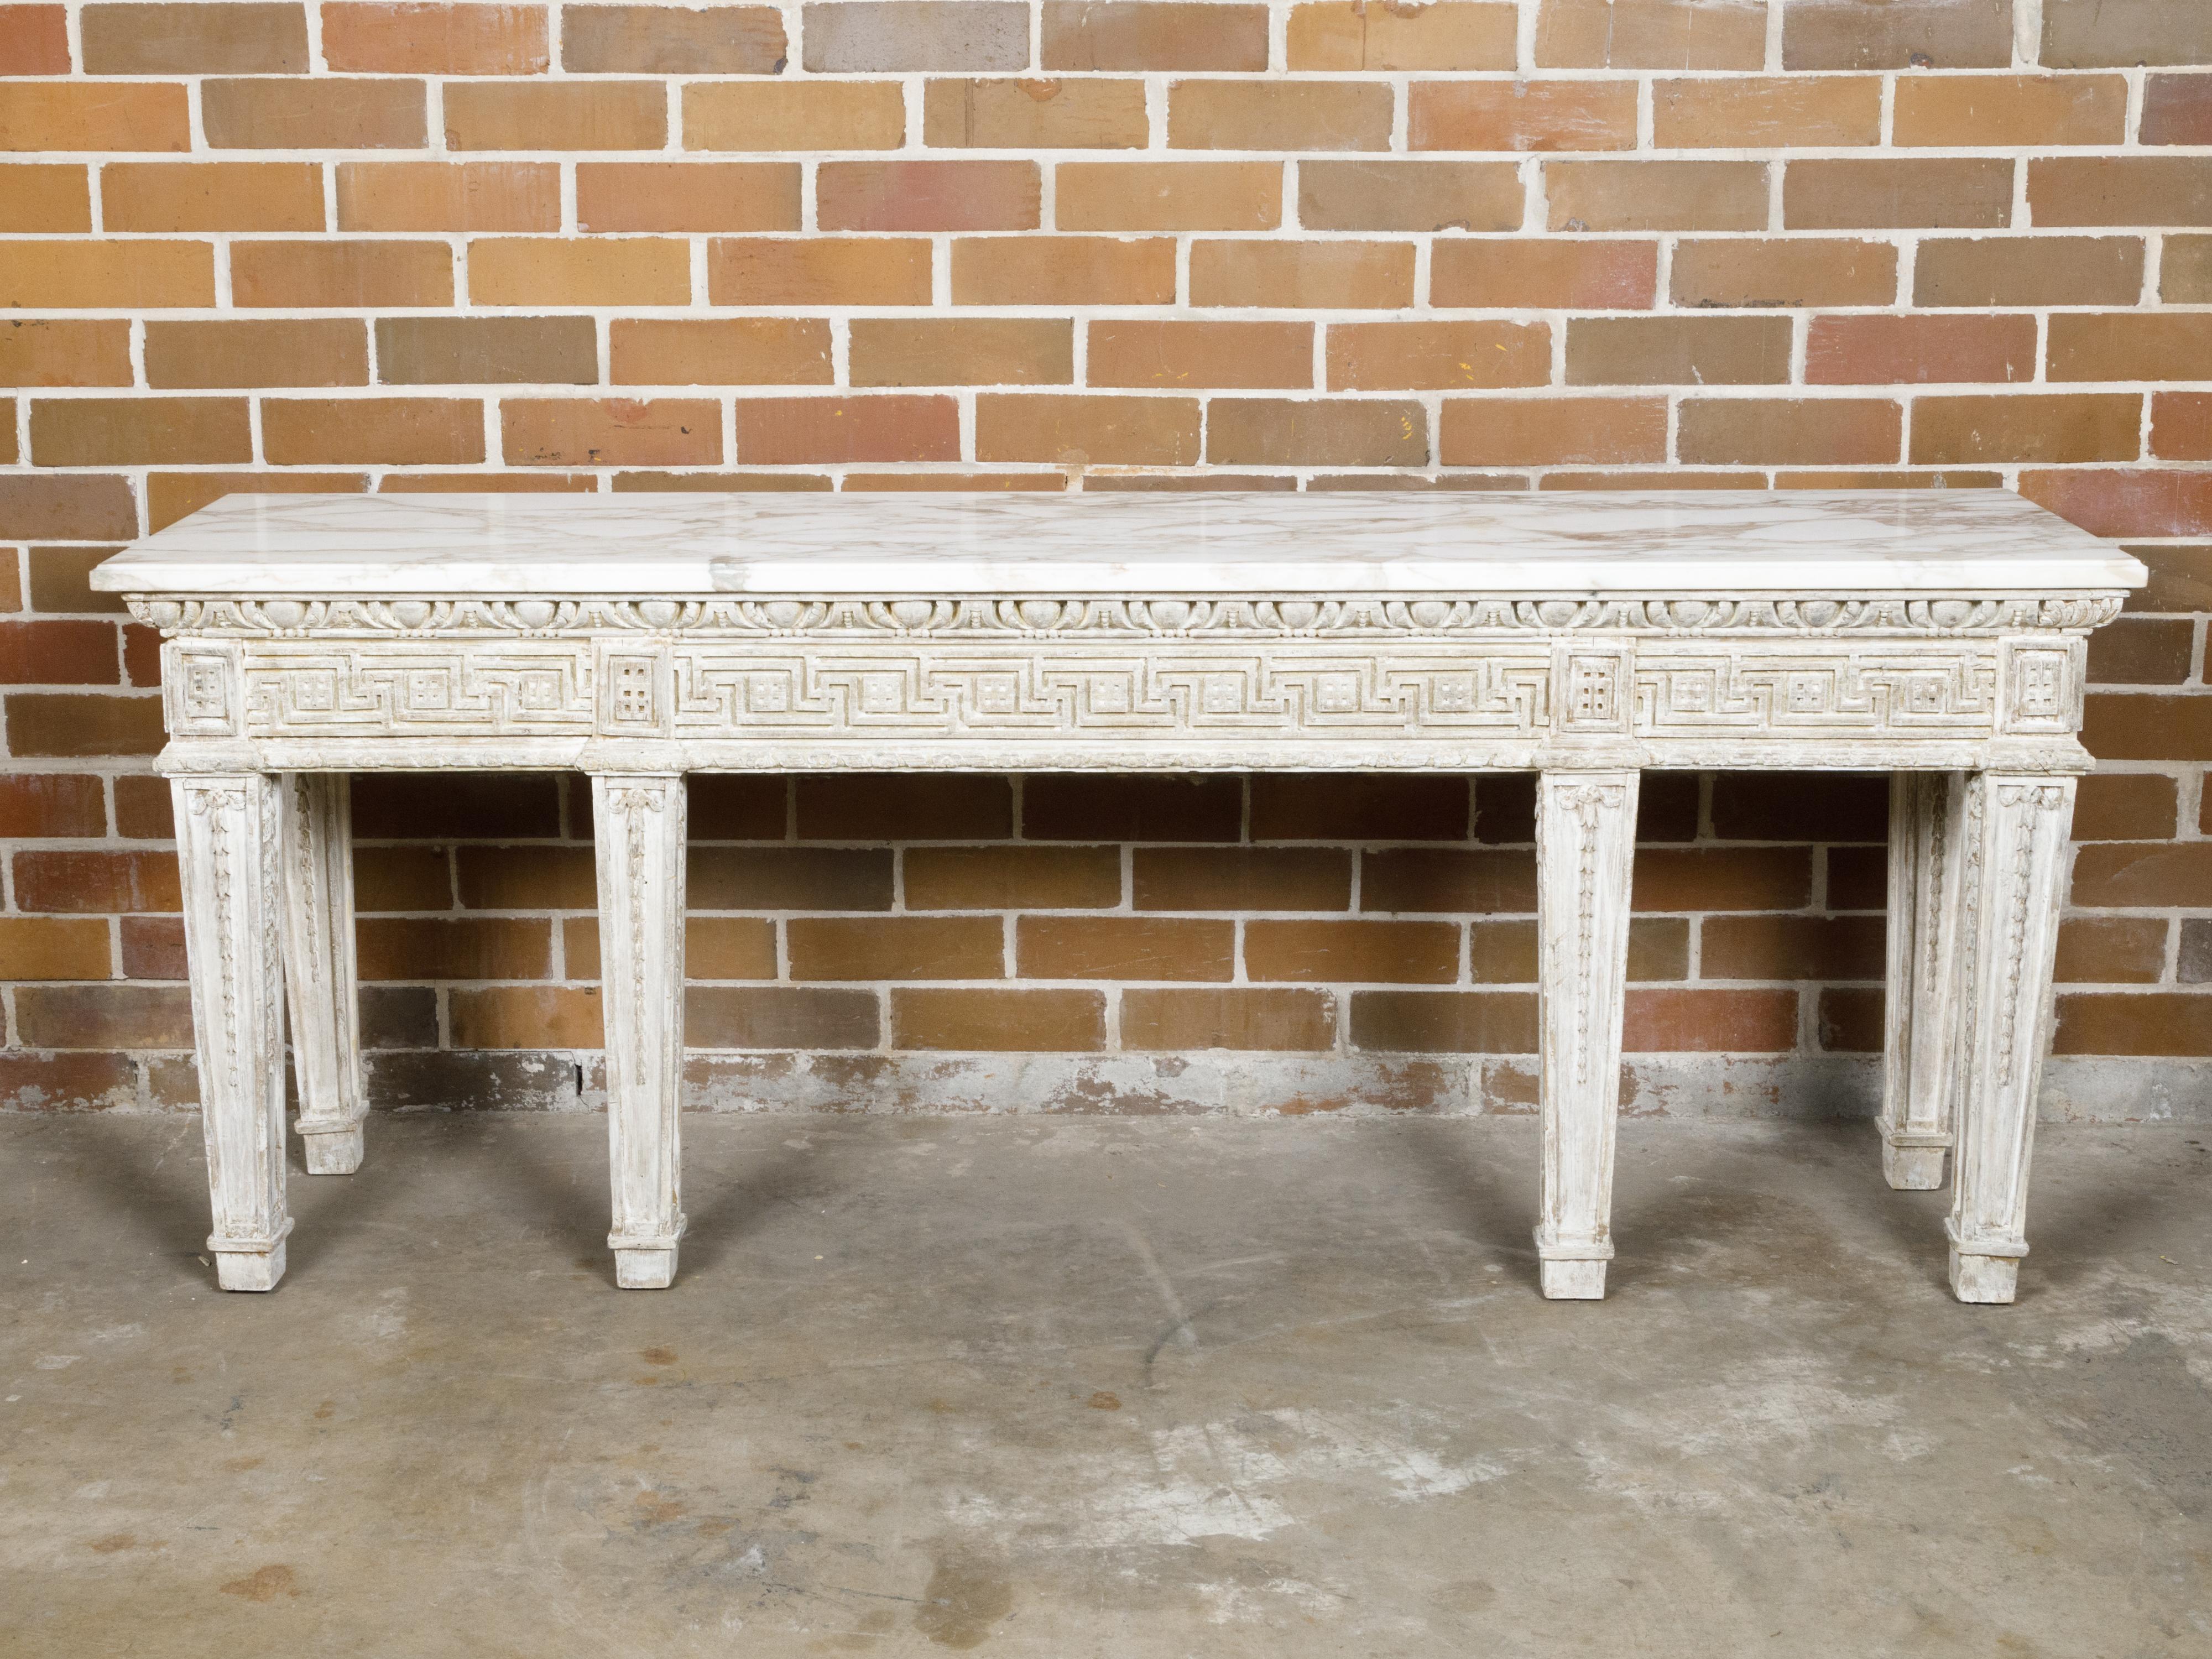 An English console table from the 19th century with white veined marble top, distressed off-white painted finish and carved Greek Key on the apron. This 19th-century English console table beautifully marries classic design with an air of distressed